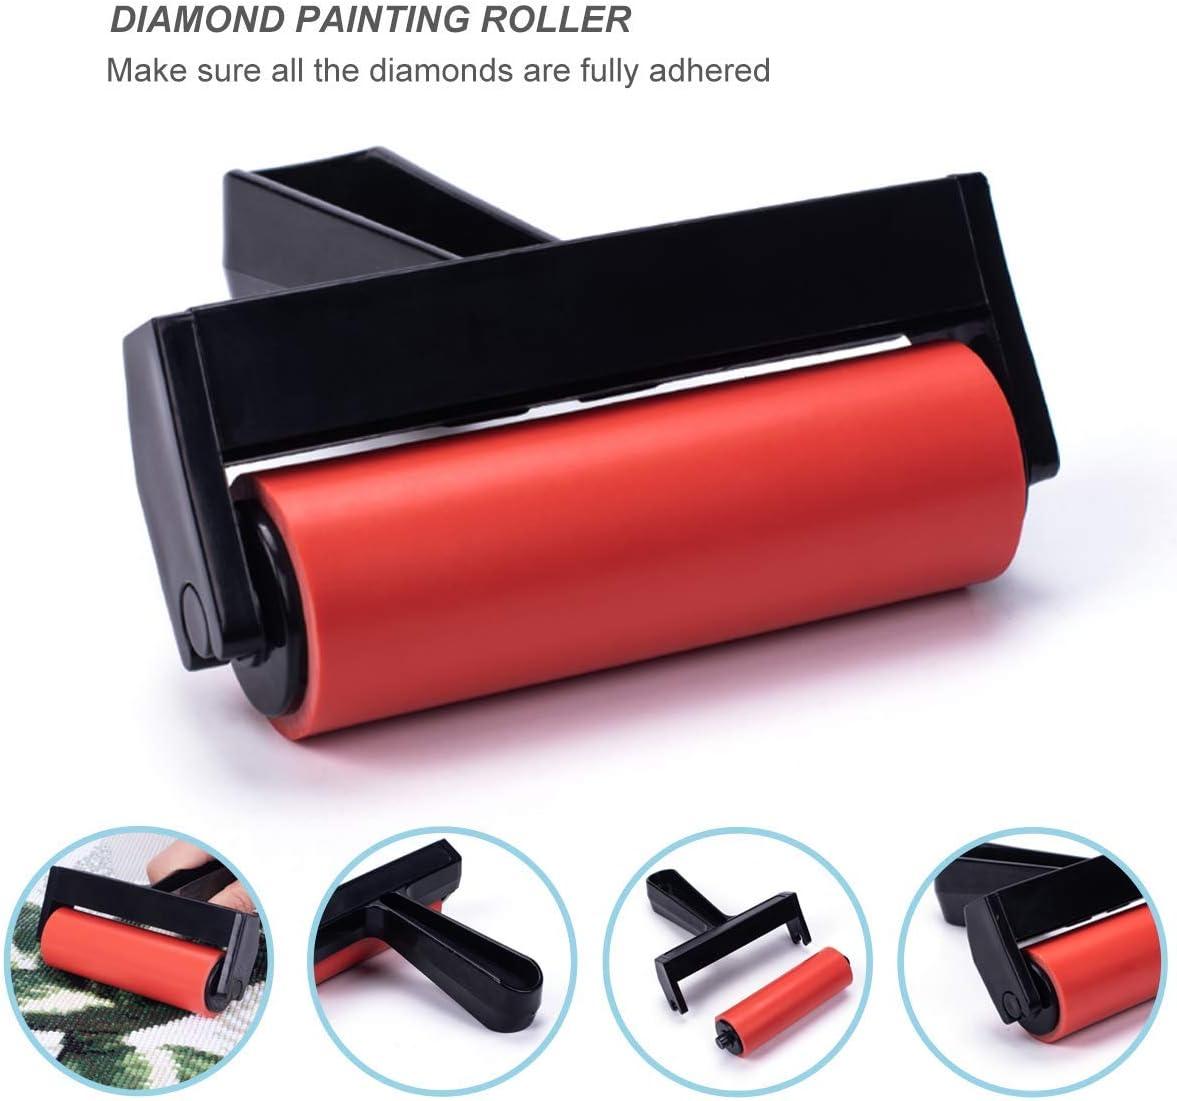 3 Pcs Red Roller Craft Rollers Diamond Art Tools Rubber